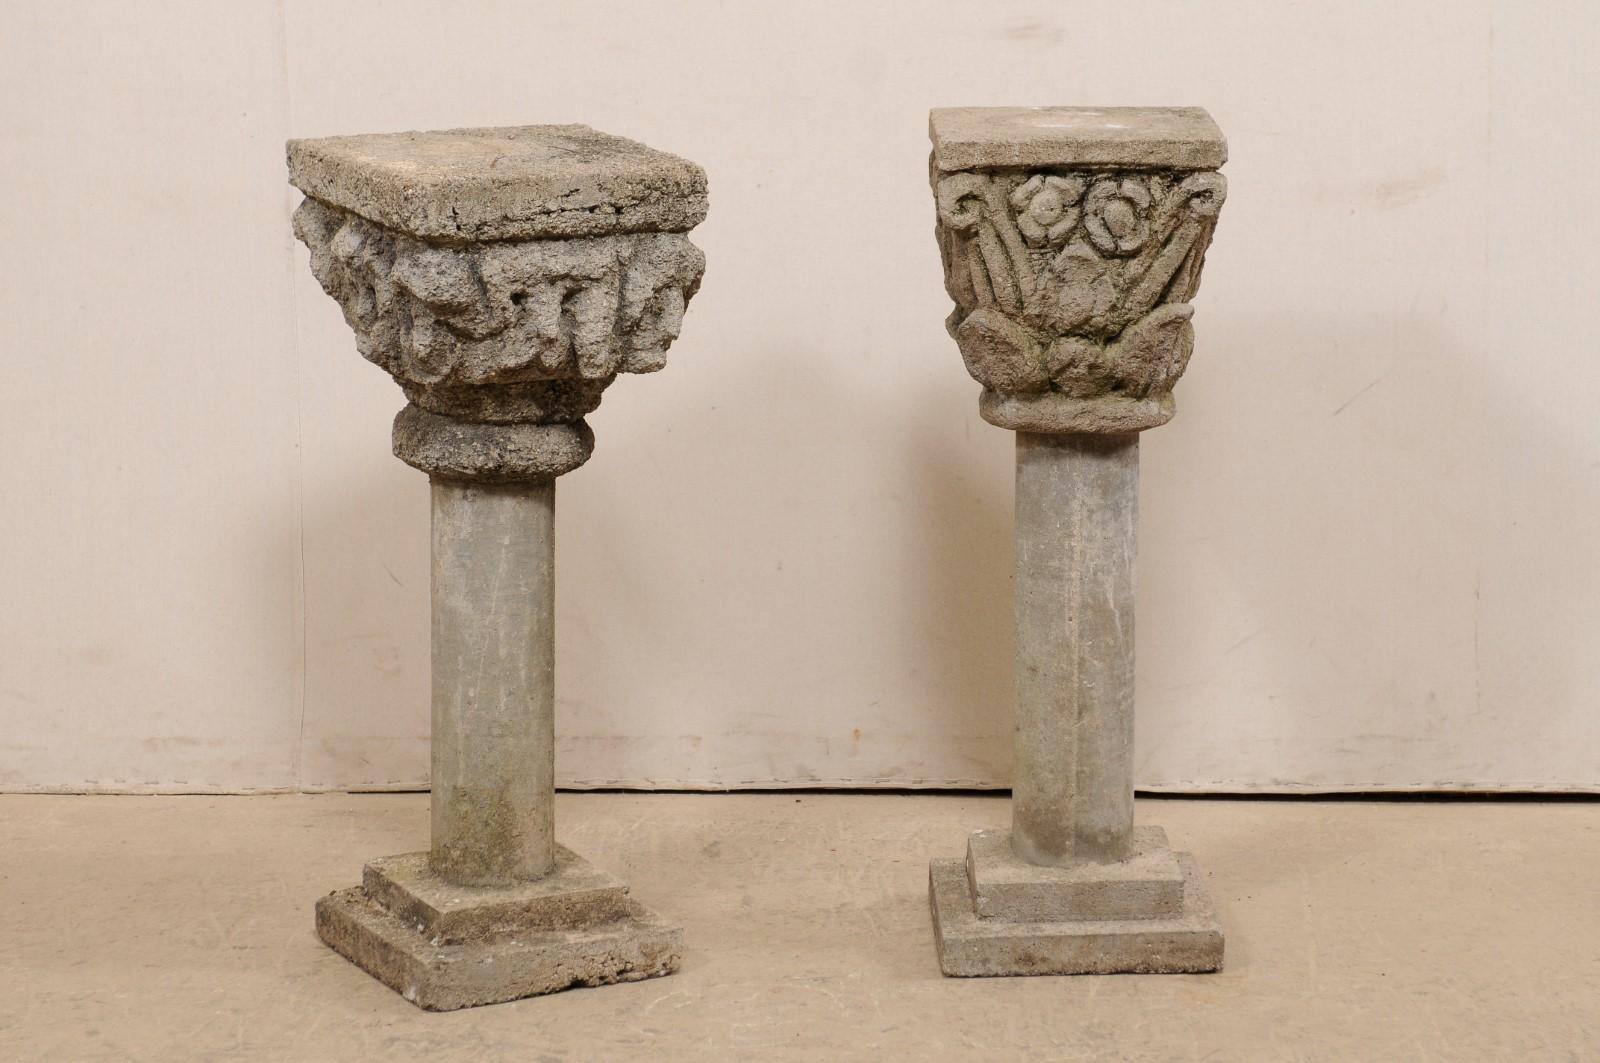 A Spanish pair of mismatched, cast-stone garden pedestals from the mid 20th century. This pair of vintage pedestals from Spain stand just shy of 3 feet in height. Each has a similar yet different design, featuring ornately decorated tops (one in a